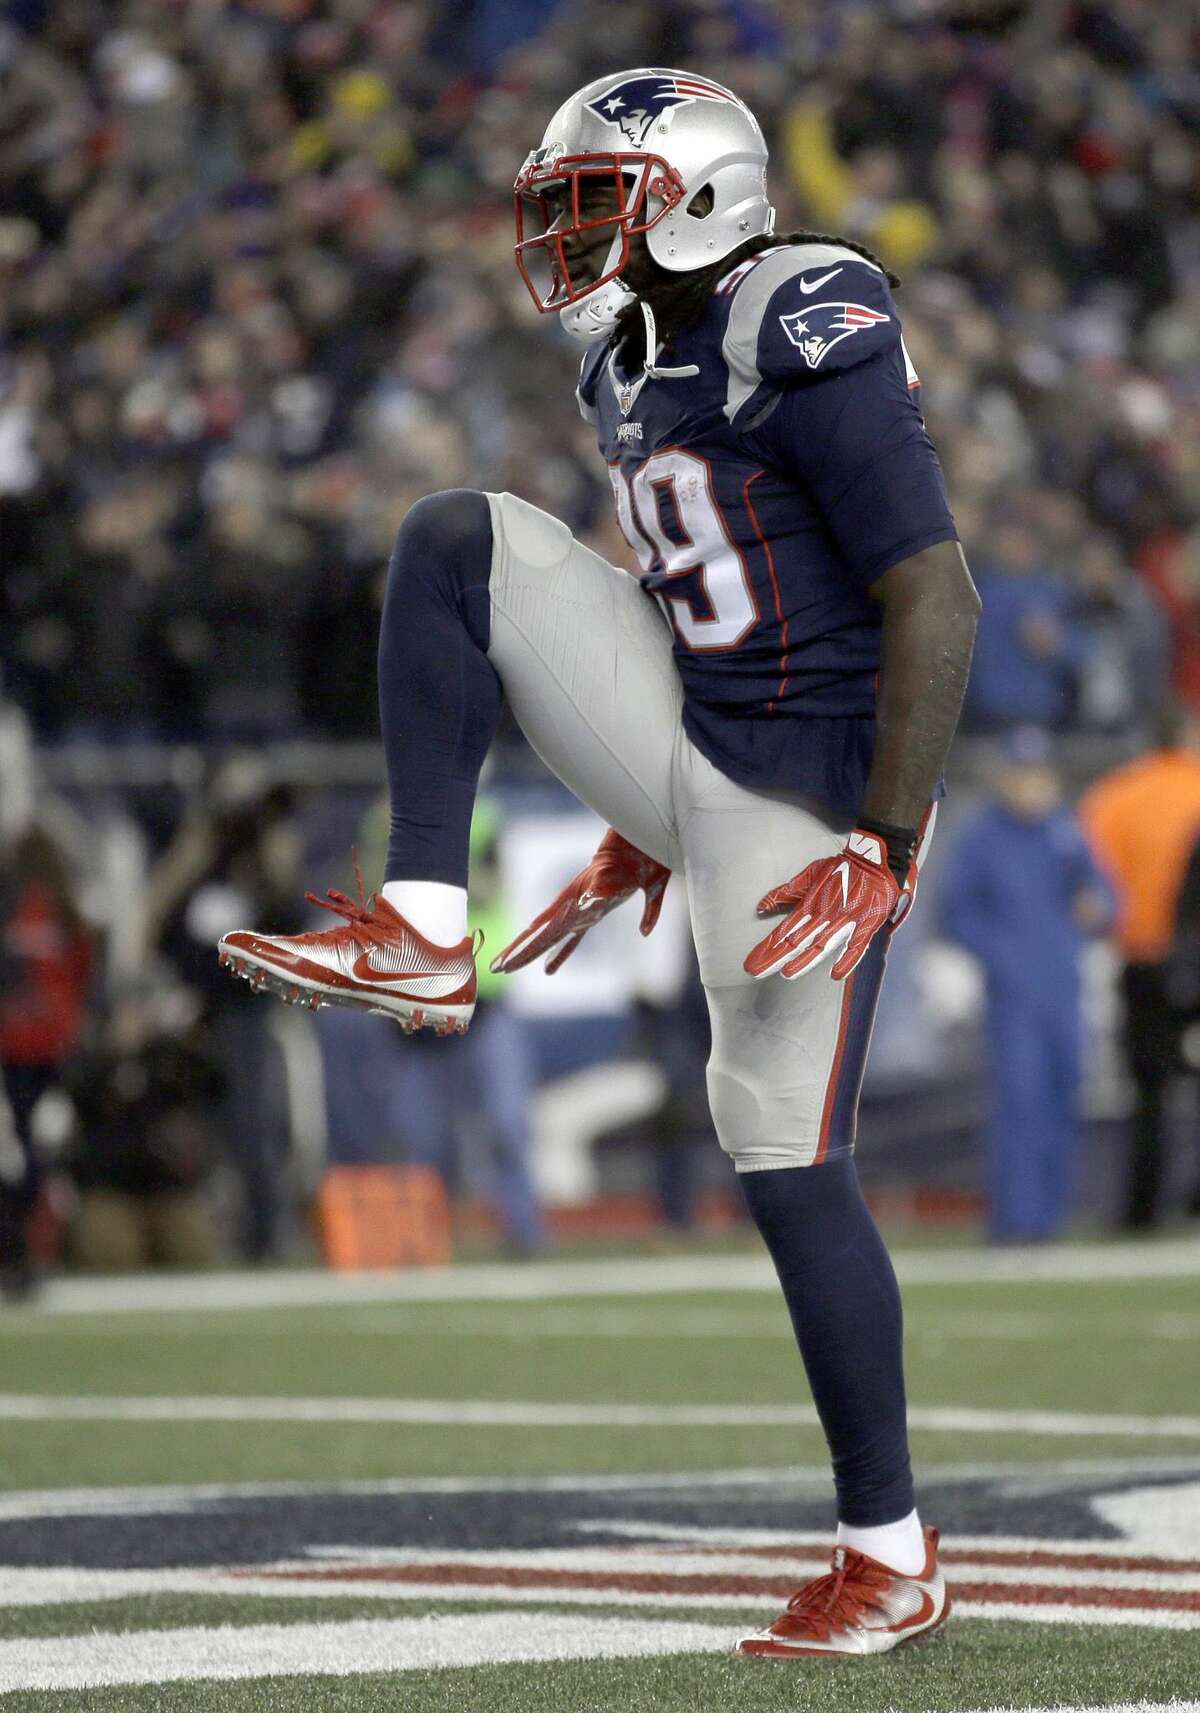 When the Patriots run LeGarrette Blount does the heavy-duty work for a running game that ranked seventh. He ran for 1,161 yards and likes to pound the ball between the tackles, but if the inside is closed off, he can bounce outside. He led the league with 18 touchdowns rushing, including 11 from the 1-yard line. Dion Lewis and James White offer a change of pace, but they combined for only 449 yards rushing. The Falcons have to be disciplined, maintaining gap control and setting the edge. Tackles Grady Jarrett and Jonathan Babineaux have to penetrate and try to hit Blount before he gets through the line.   Edge: Patriots Patriots rushing yards per game/rank: 117.0/7 Falcons rushing yards allowed per game/rank: 104.5/17 